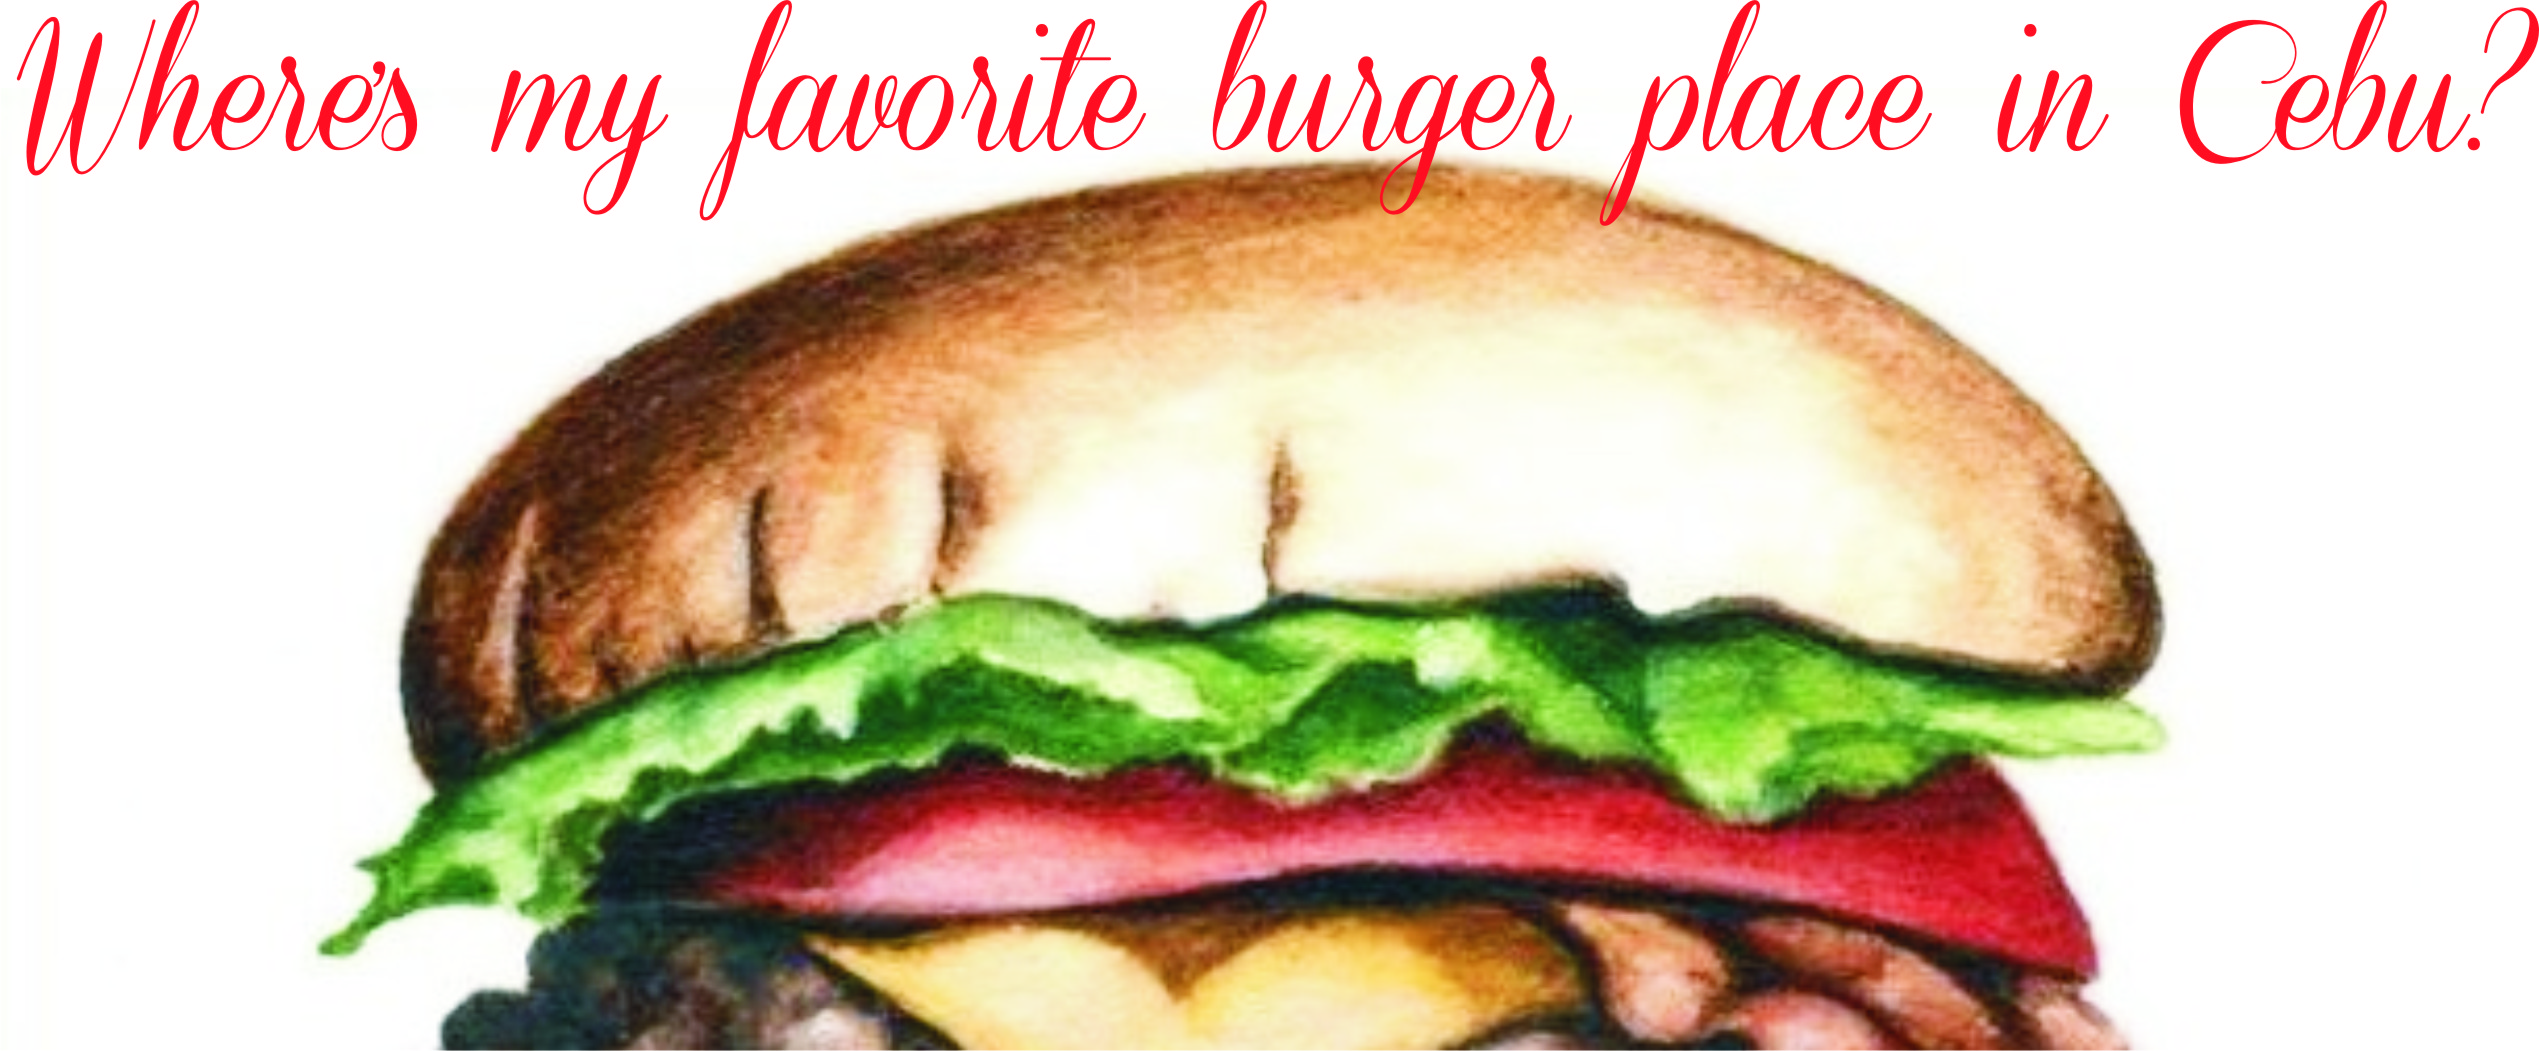 IssaEats: My (CURRENT) Favorite Burger Place